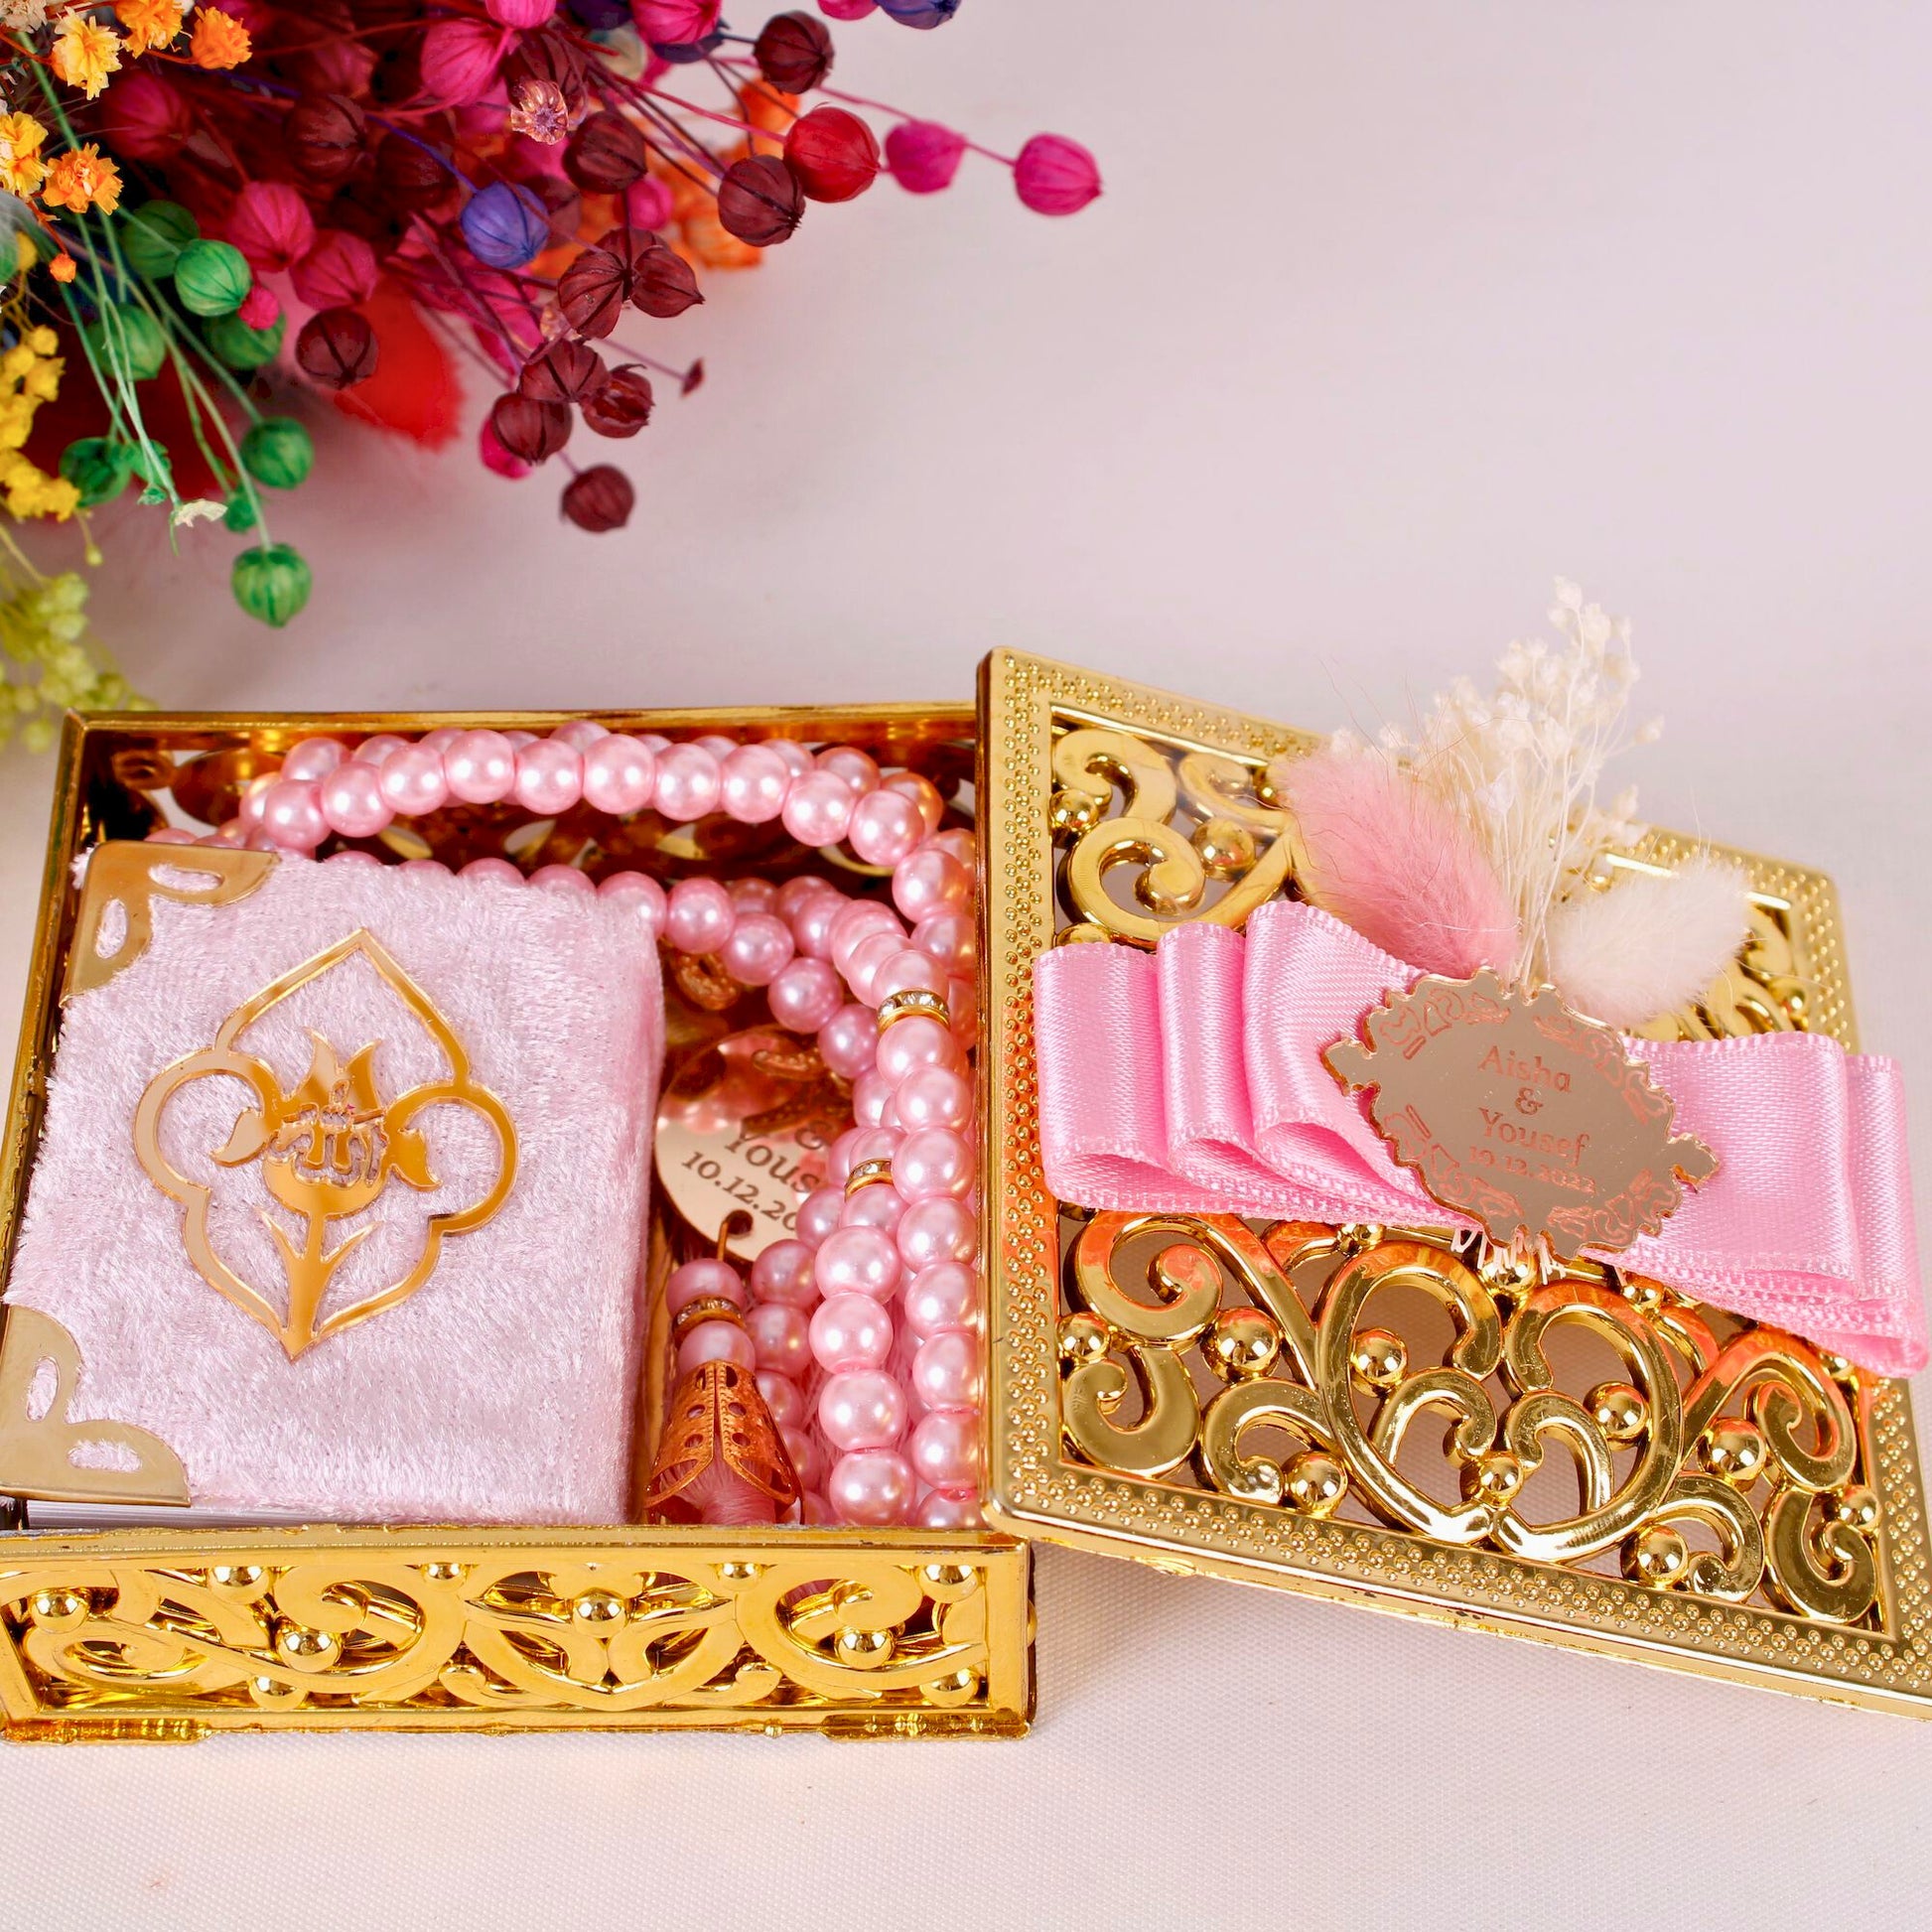 Personalized Luxury Mini Quran Tasbeeh with Dried Flower Wedding Favor - Islamic Elite Favors is a handmade gift shop offering a wide variety of unique and personalized gifts for all occasions. Whether you're looking for the perfect Ramadan, Eid, Hajj, wedding gift or something special for a birthday, baby shower or anniversary, we have something for everyone. High quality, made with love.